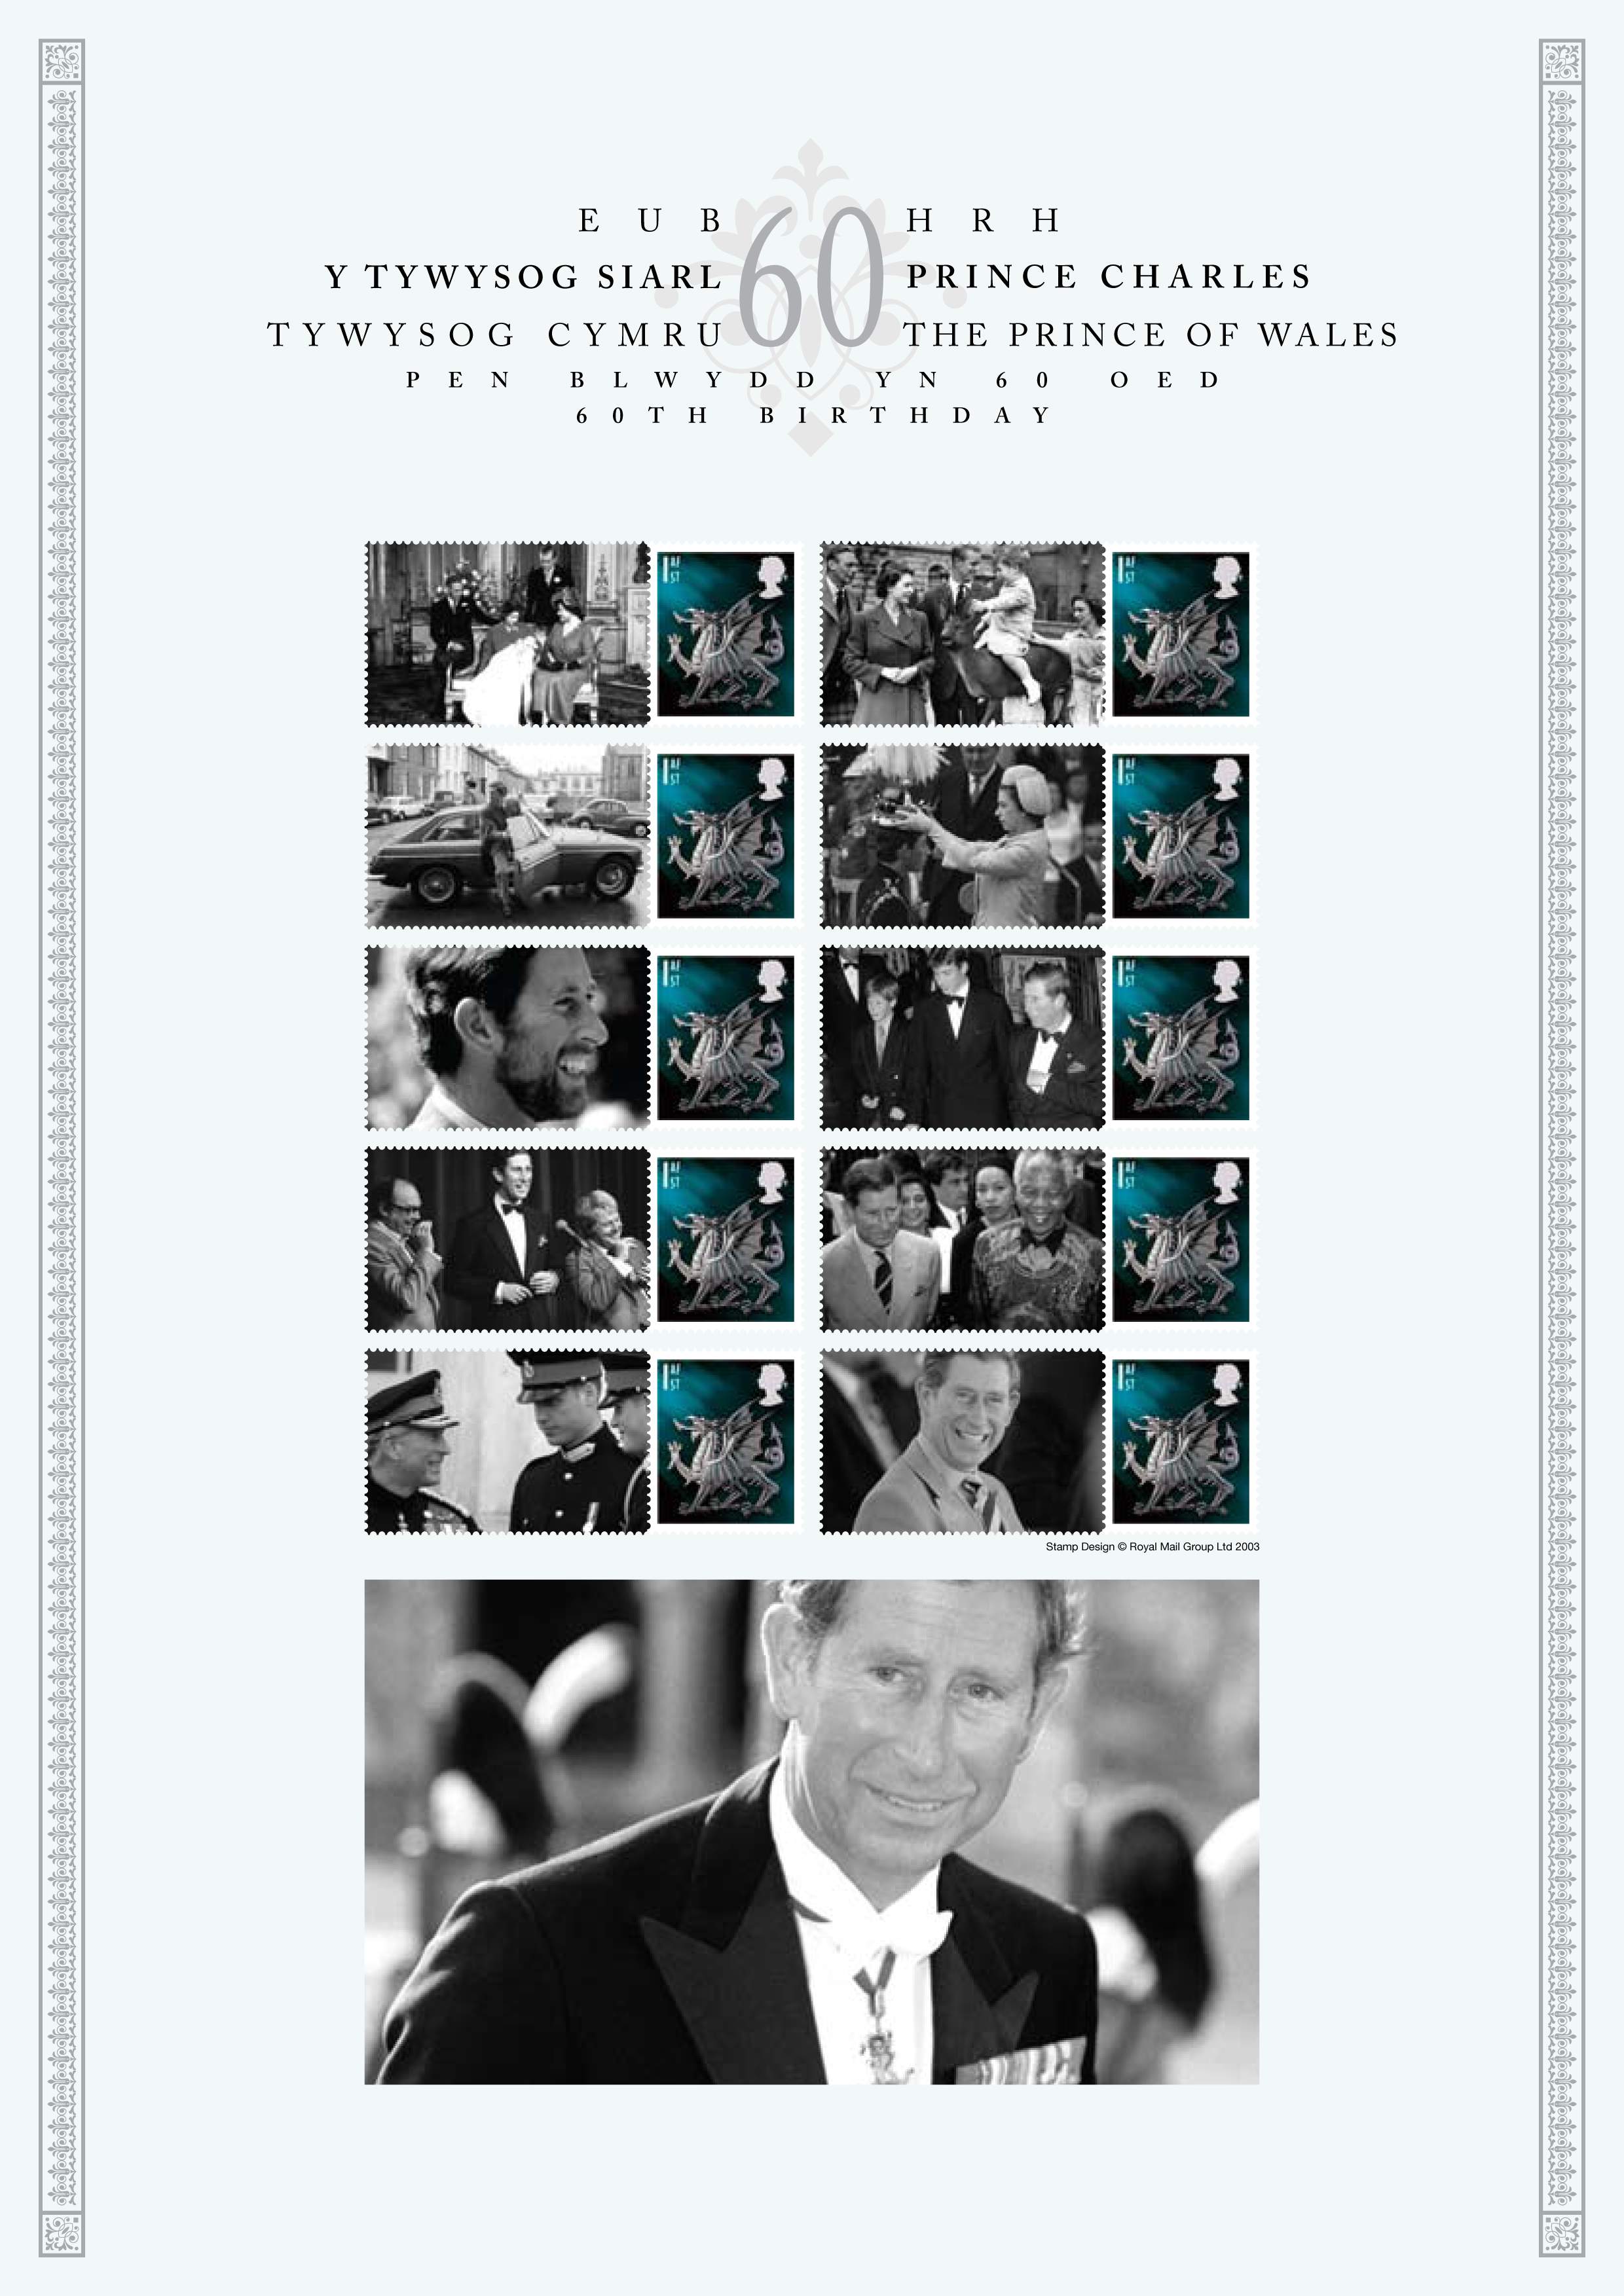 Royal Mail Commemorative Sheet to mark the 60th birthday of Charles, Prince of Wales.